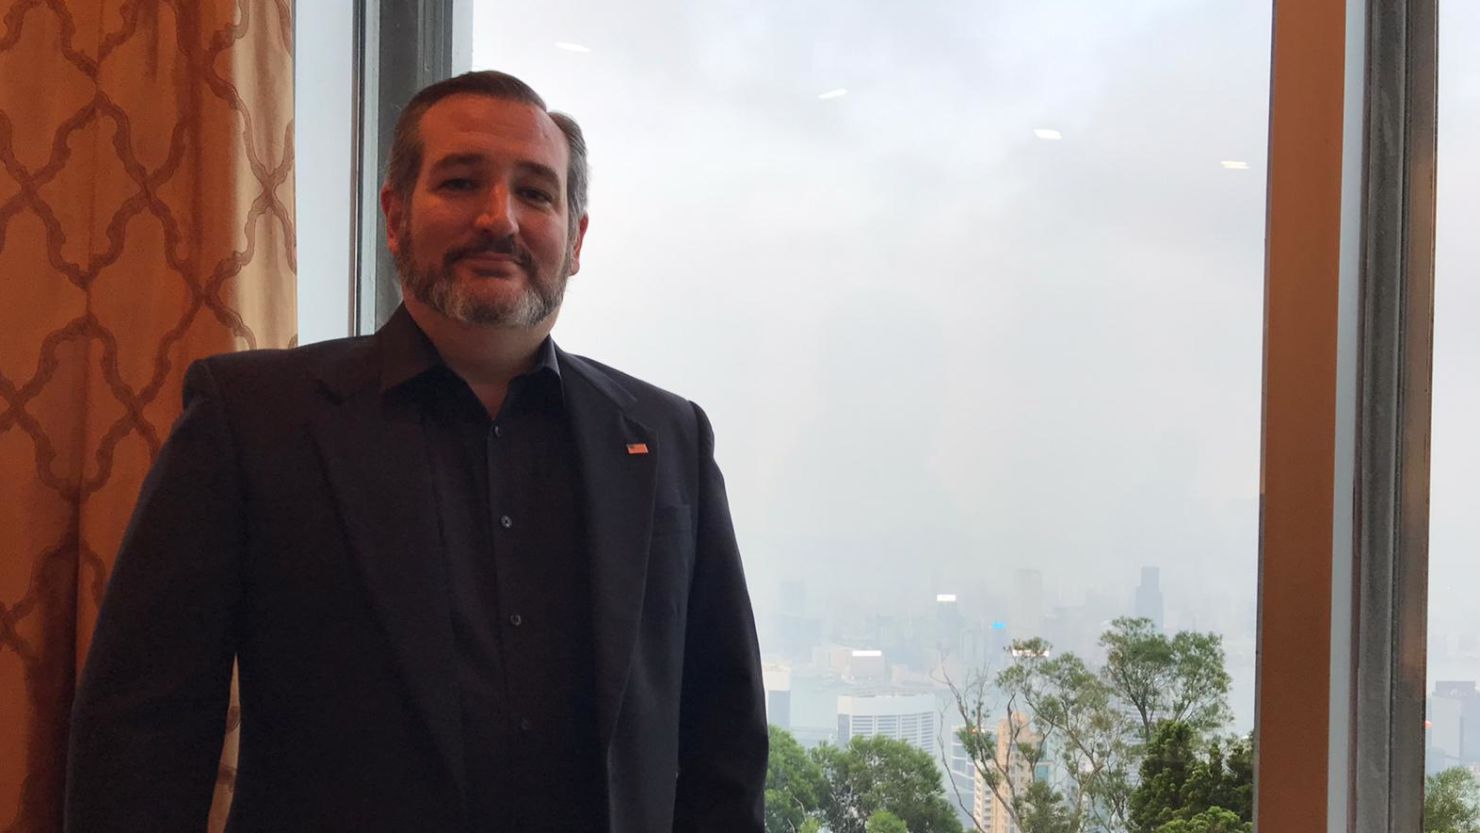 US Sen. Ted Cruz at the US consul general's residence in Hong Kong on Saturday. Cruz dressed in all black to support pro-democracy protesters.